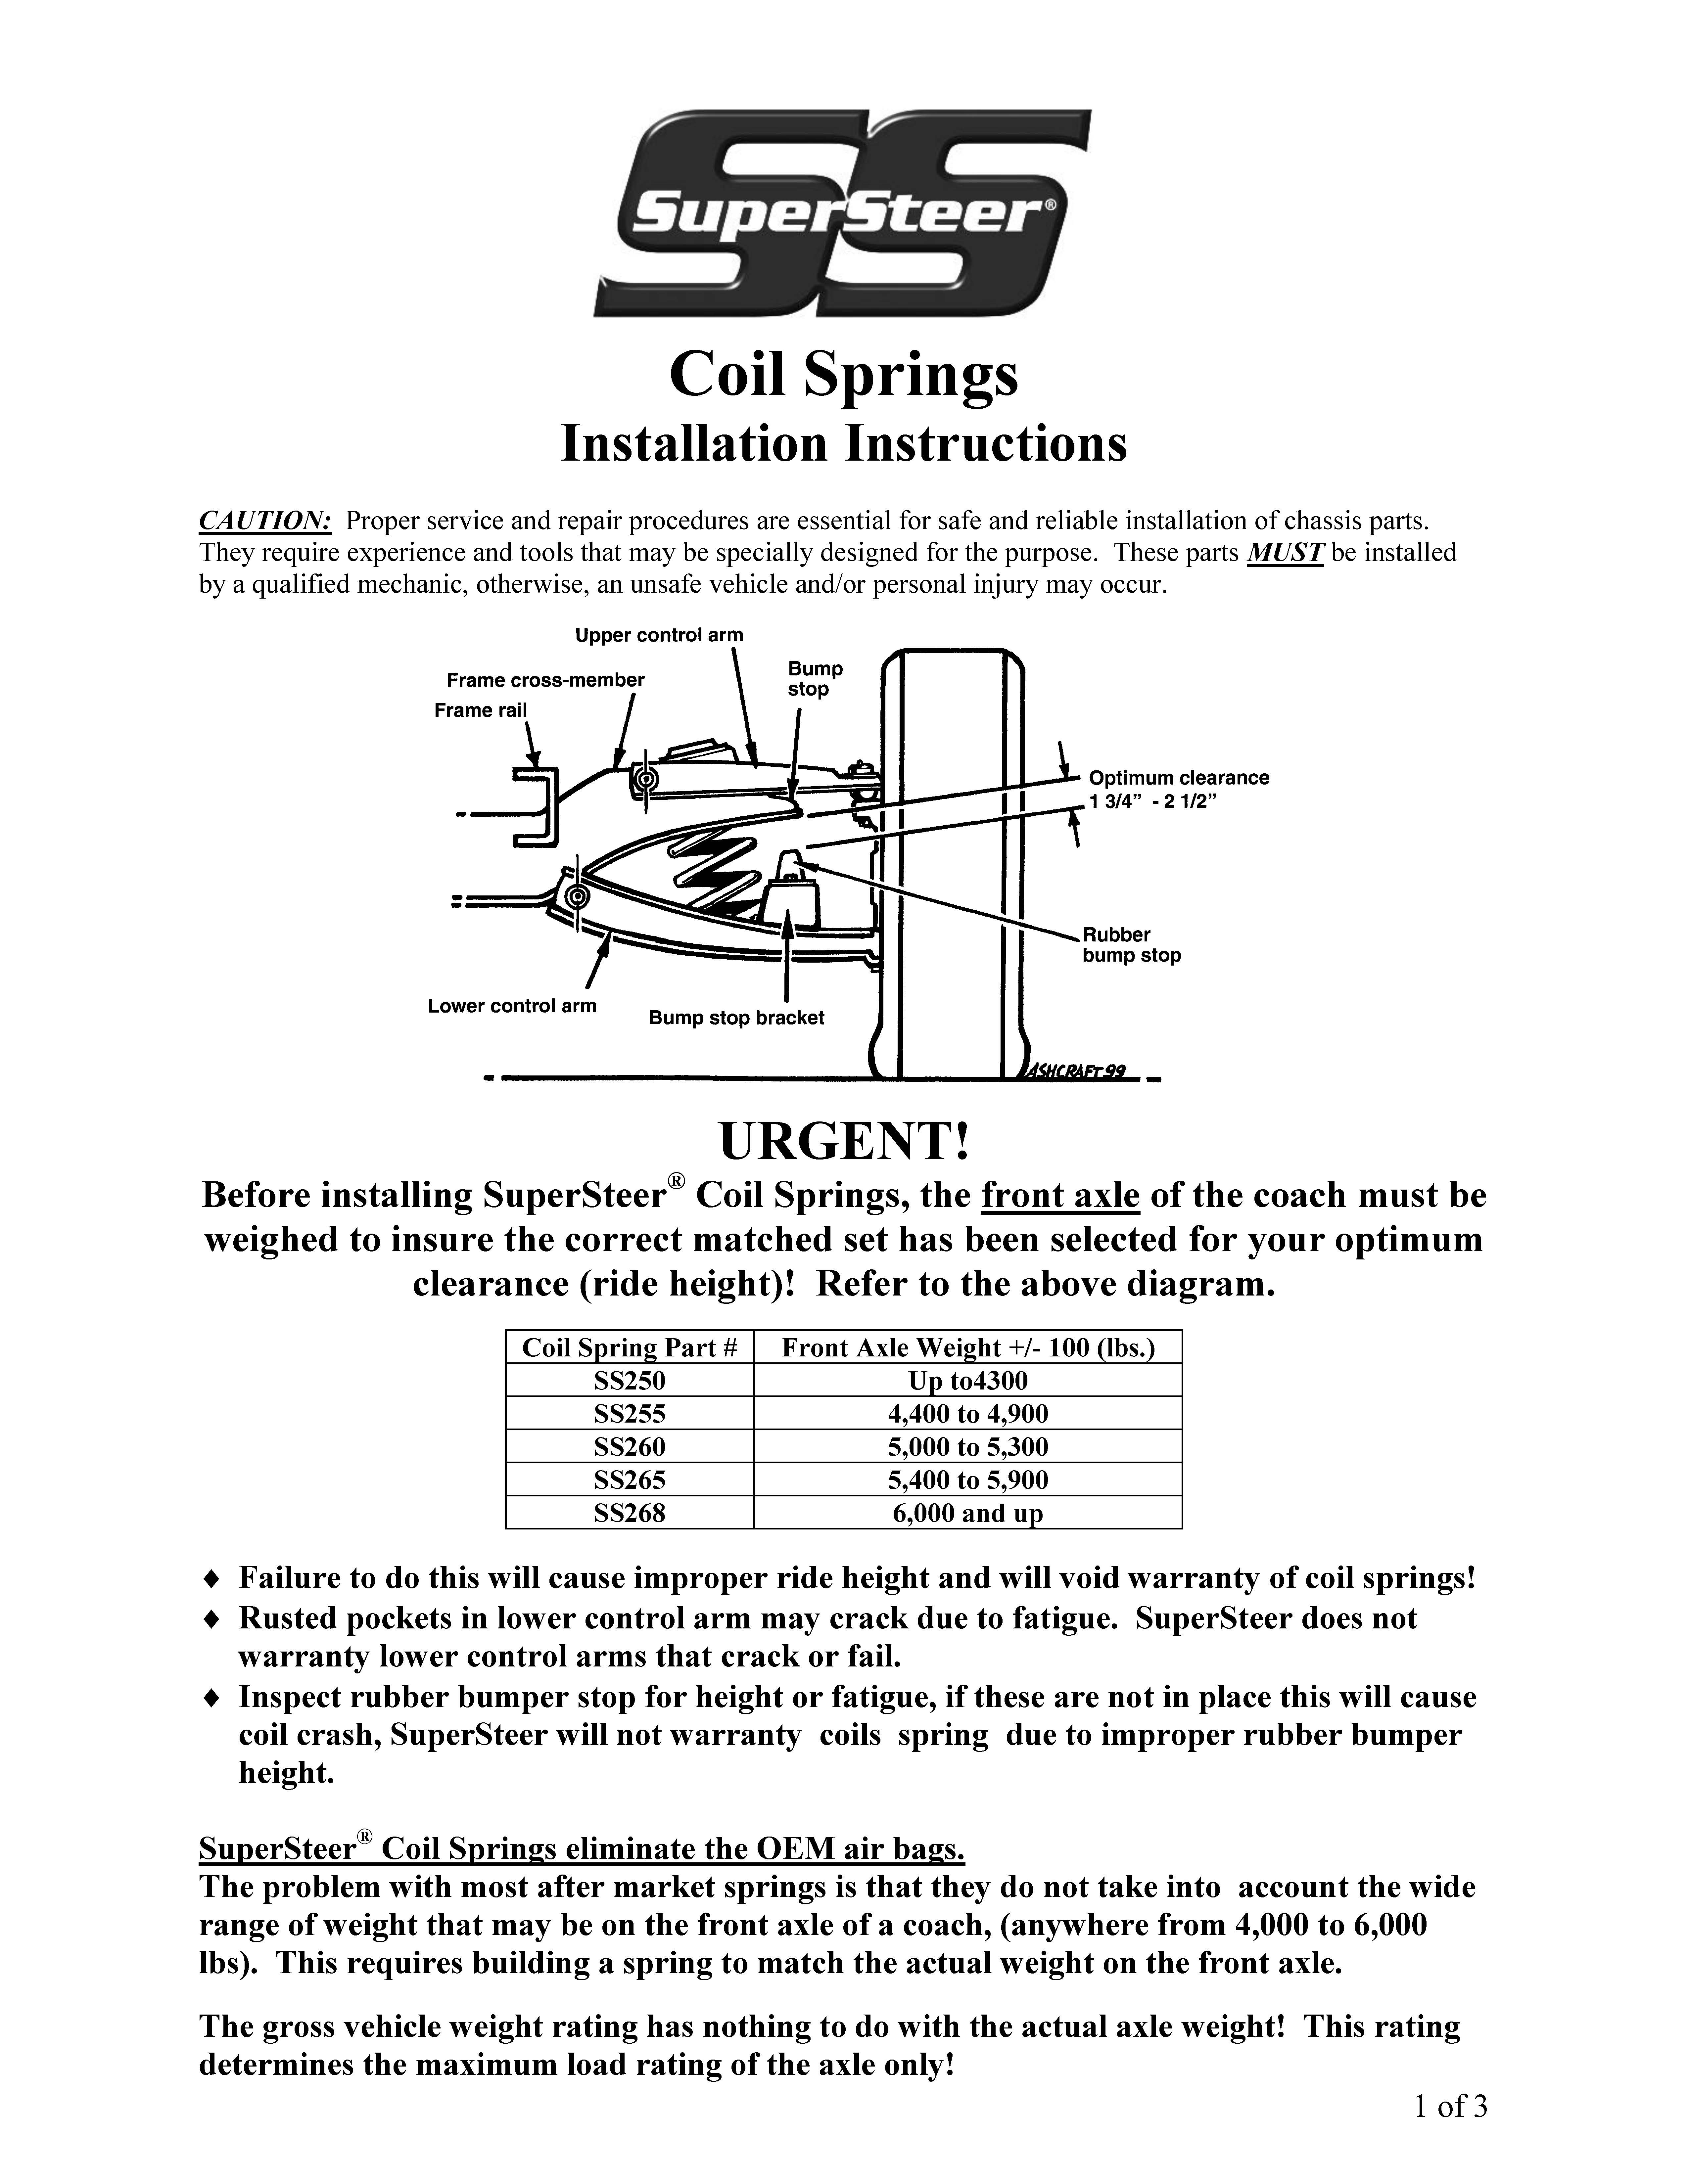 coil-spring-installation-10-06_Page_1.jpg